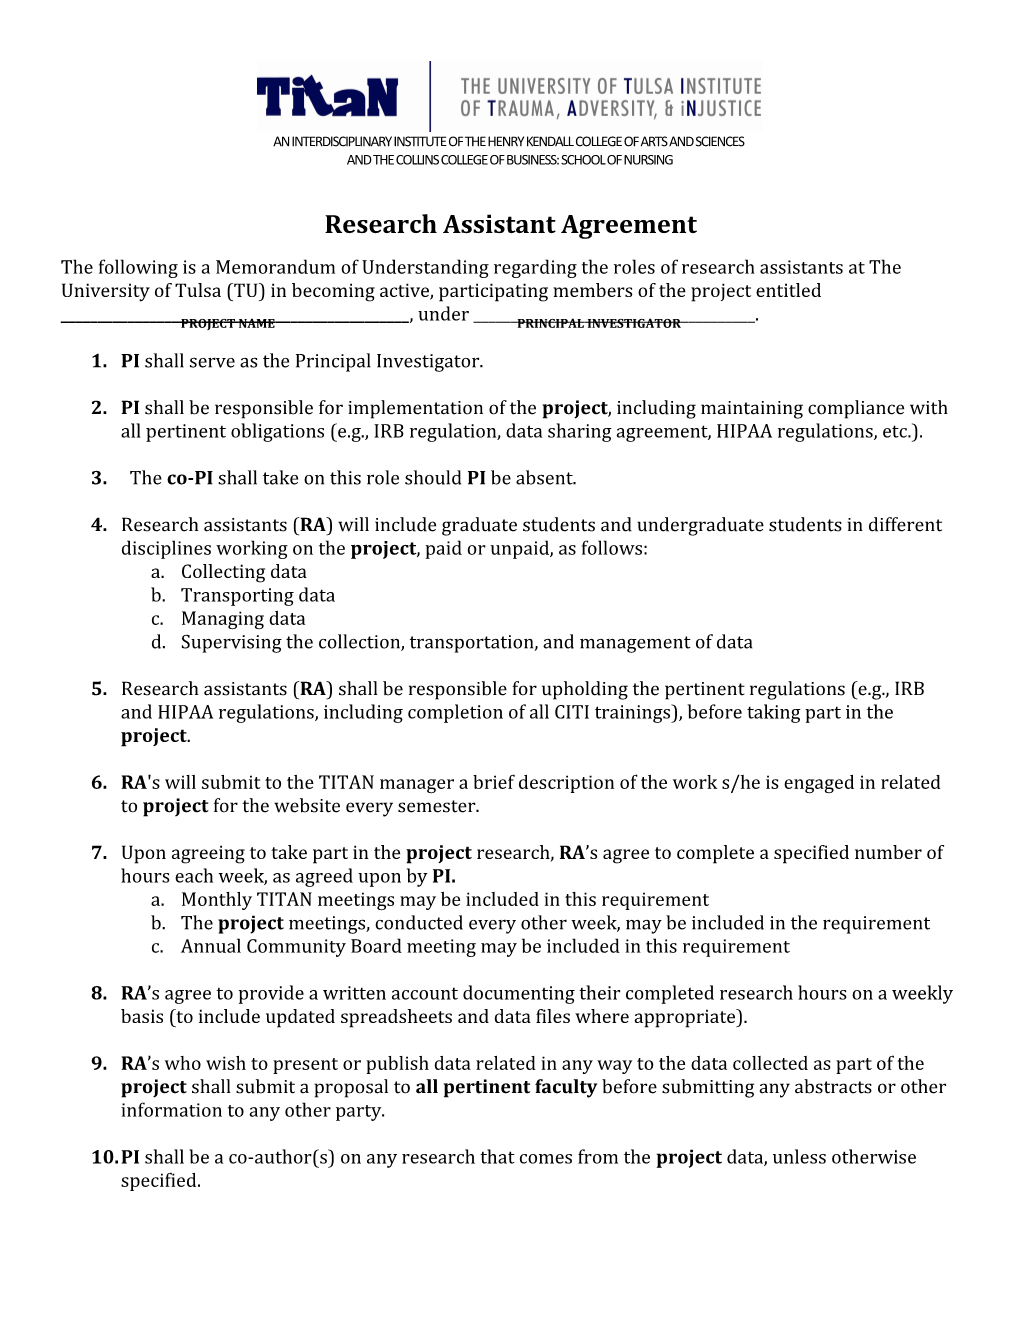 Research Assistant Agreement